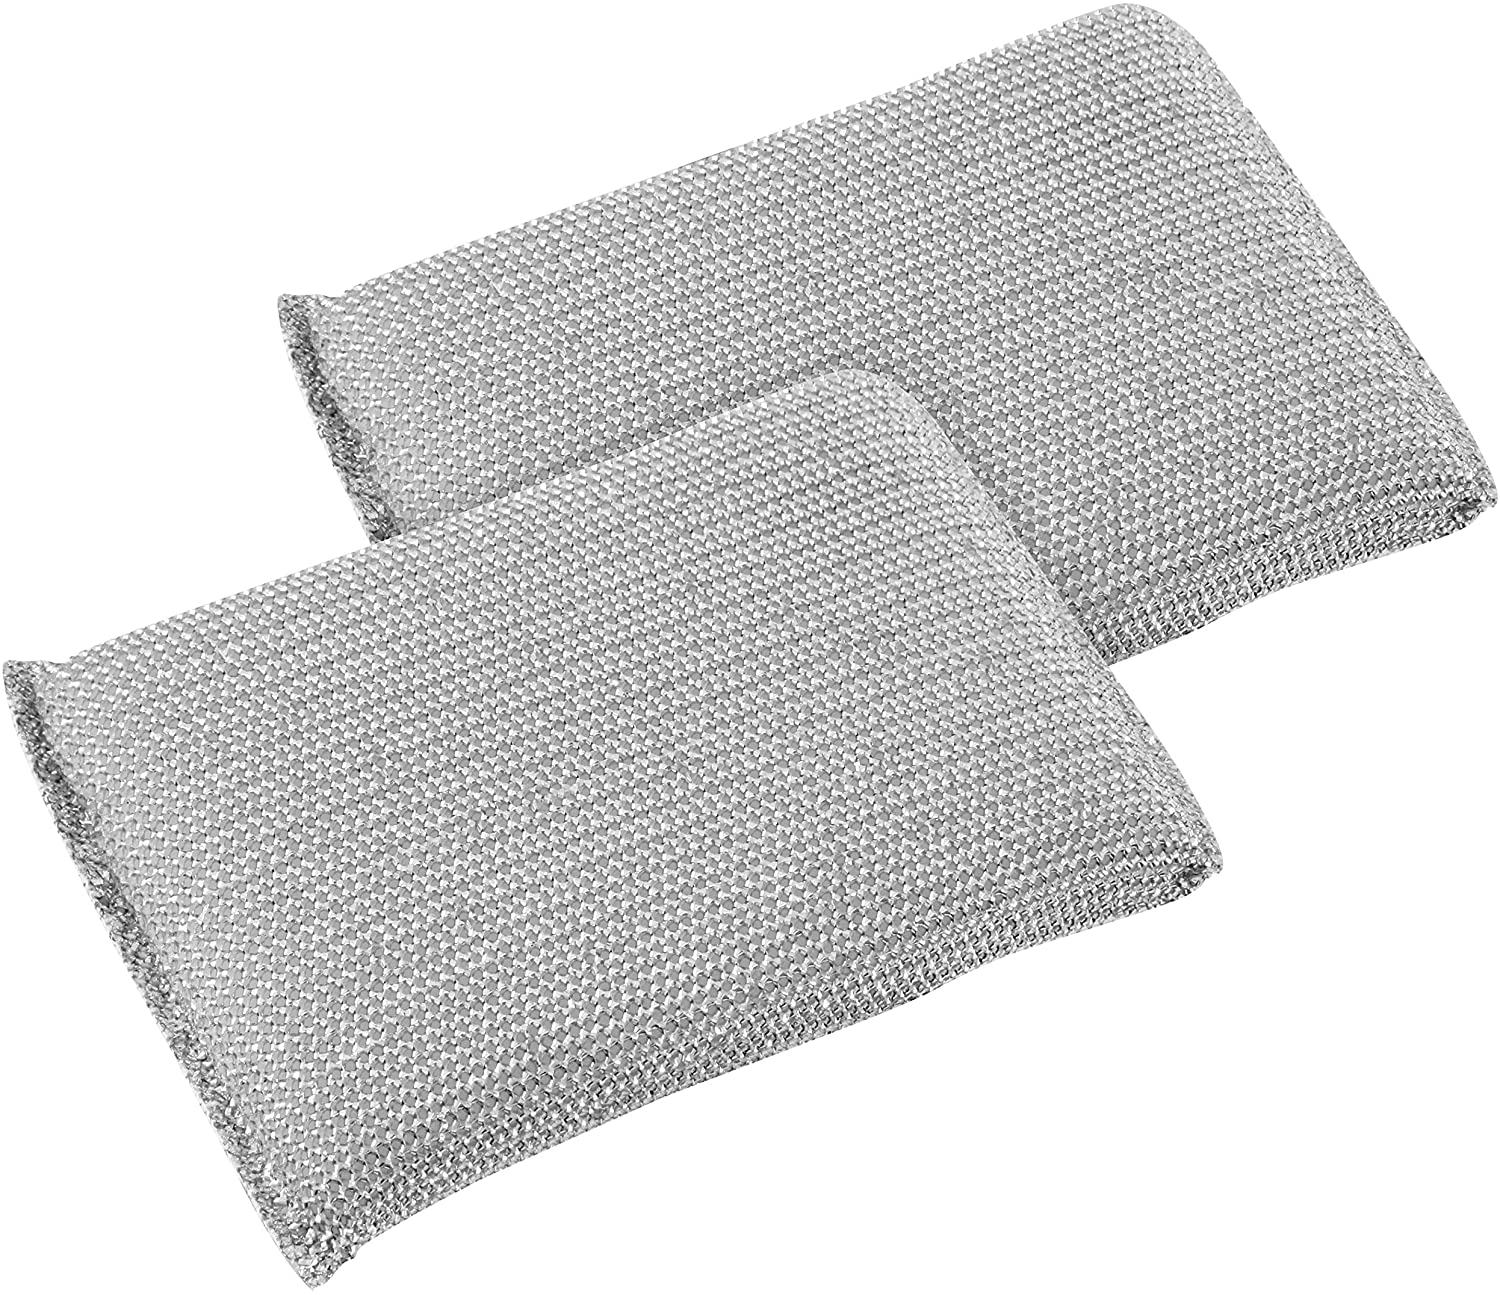 Sweany Scouring Pad Set Of 2Pcs